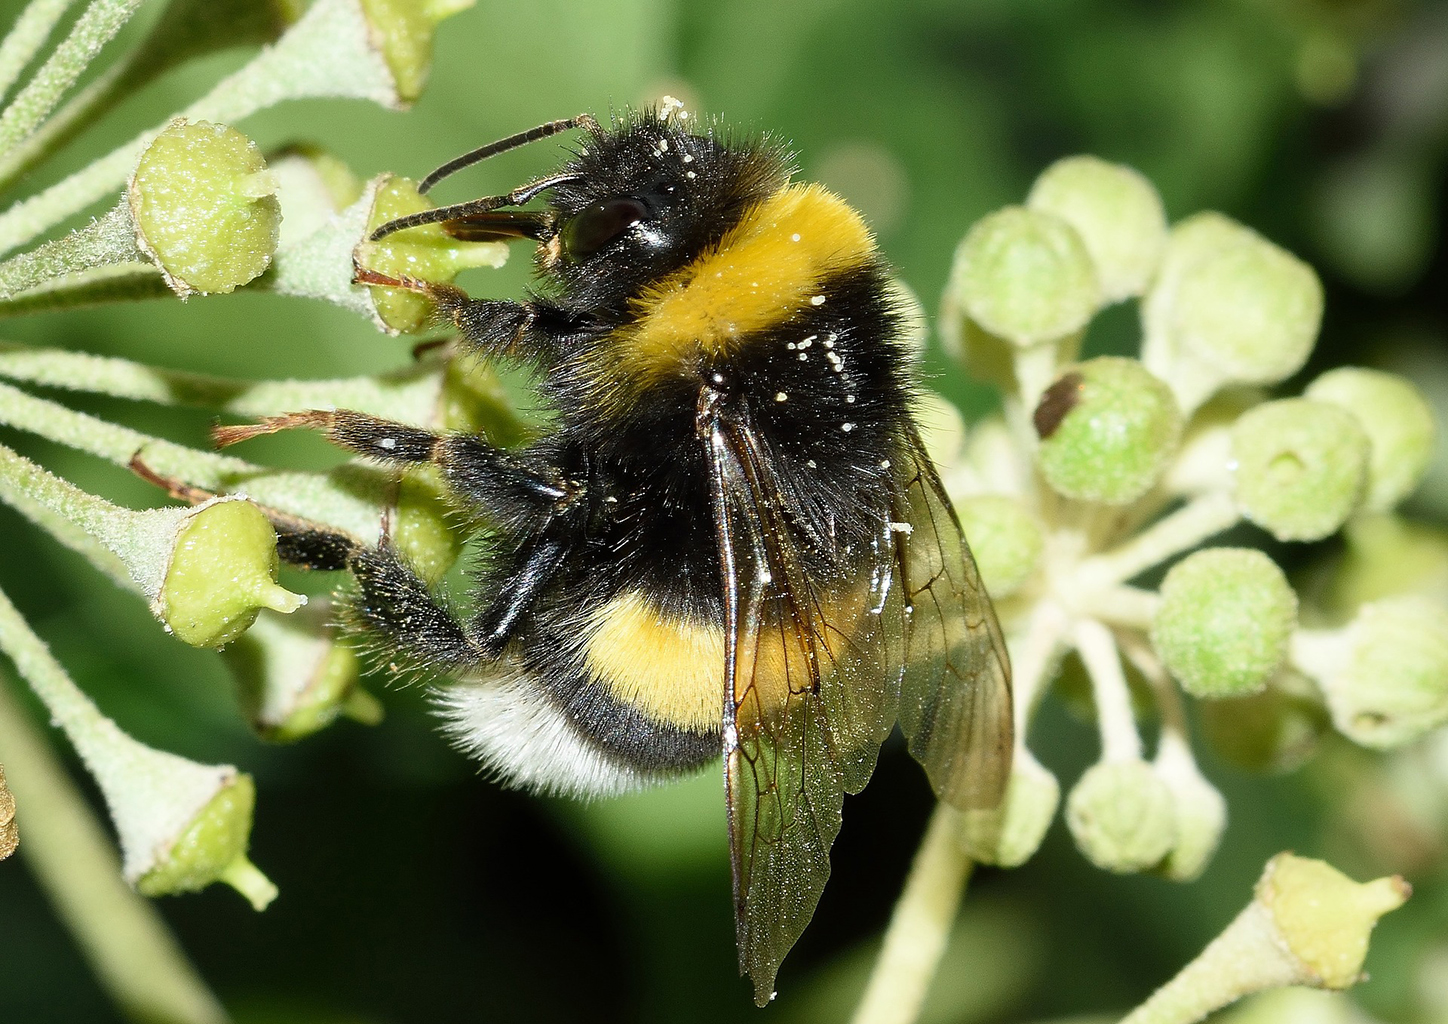 New study: neonicotinoid insecticides linked to wild bee decline across England | Centre for Ecology & Hydrology